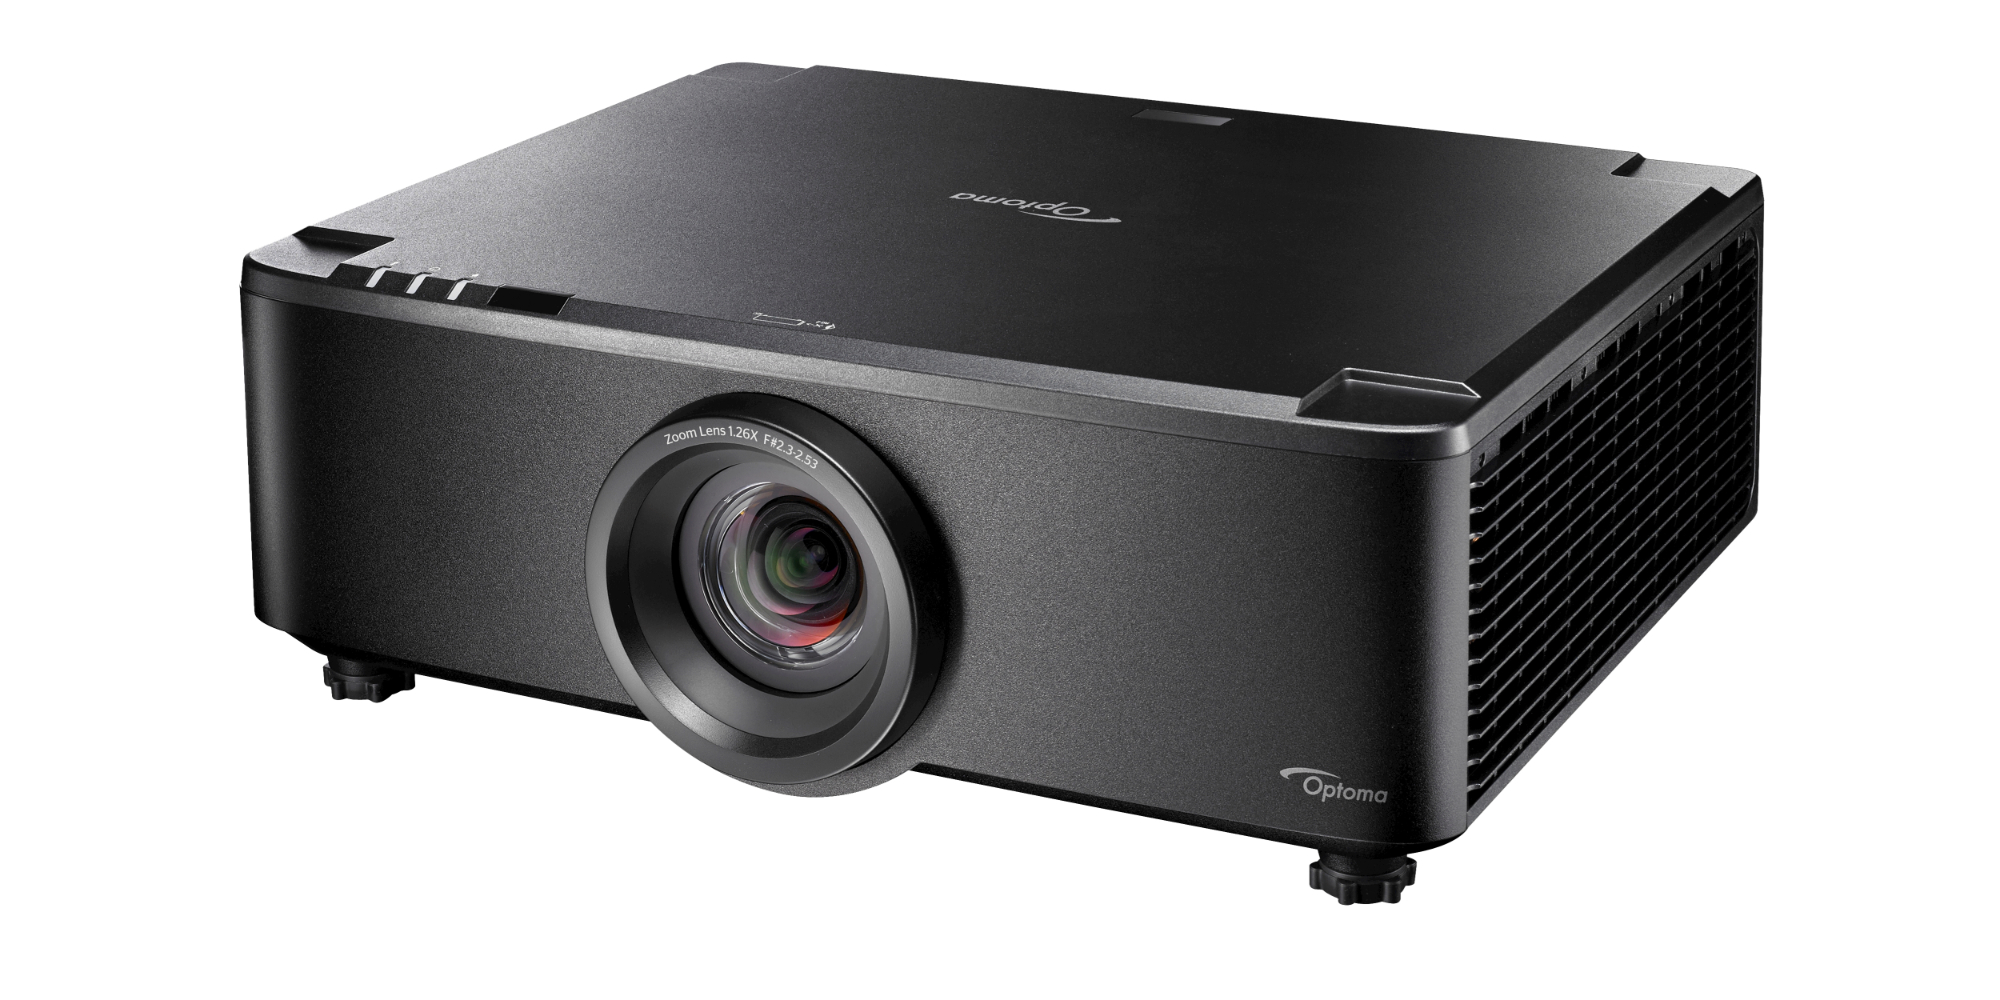 Optoma laser projector 7,000-lumen, 300-inch screen - 9to5Toys